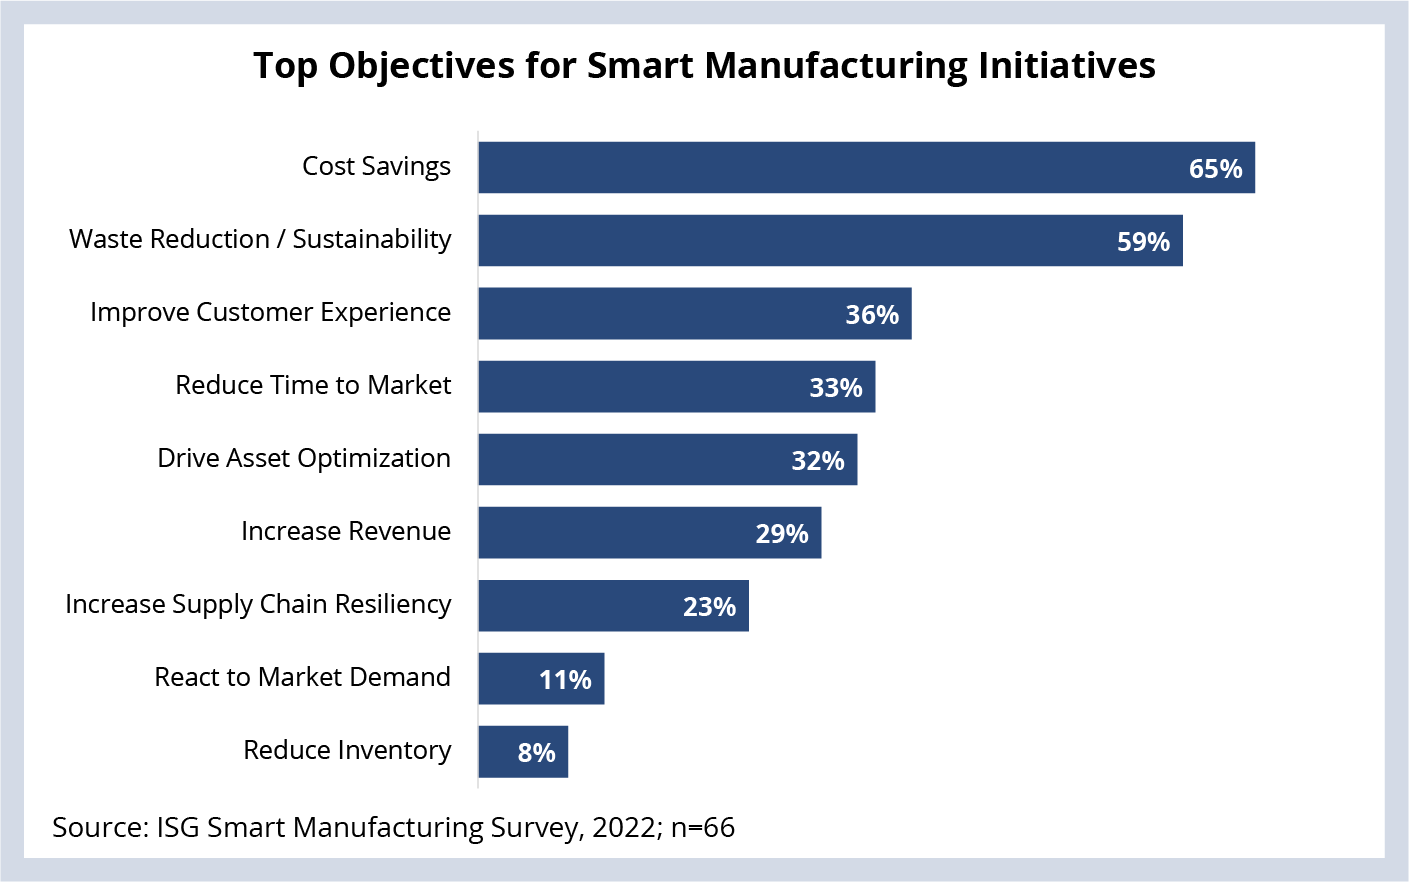 Top Objectives for Smart Manufacturing Initiatives